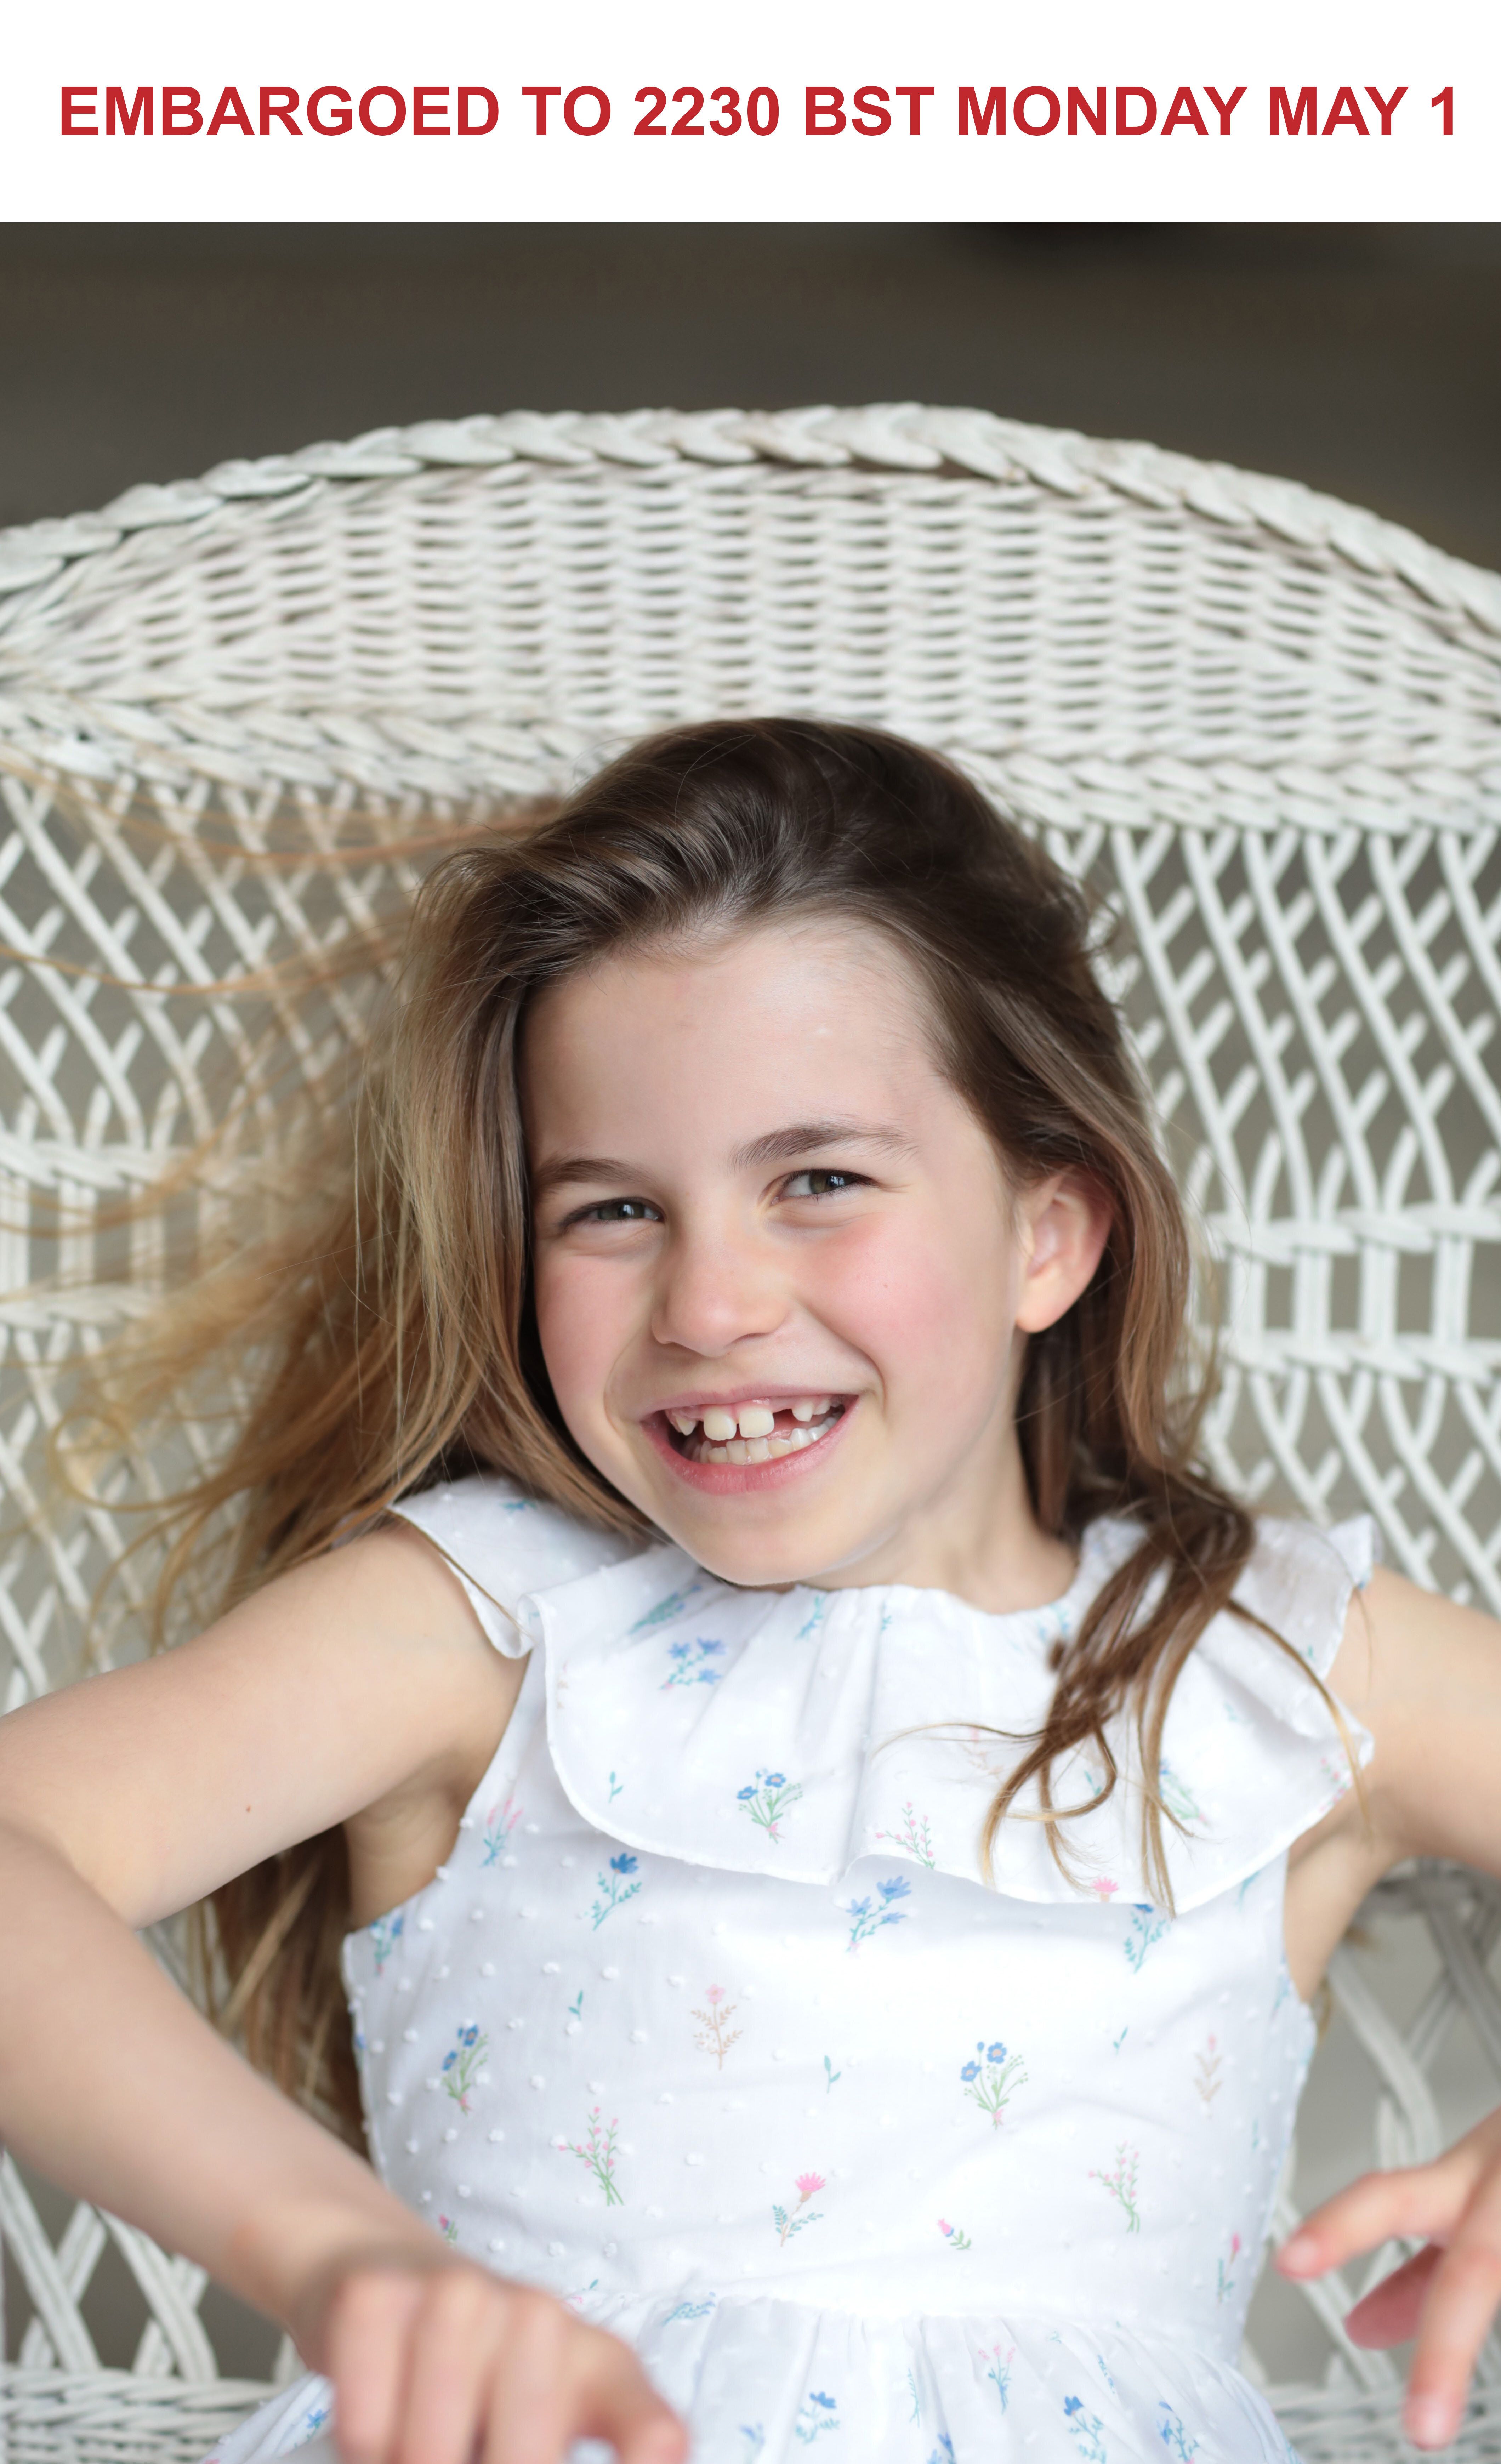 A photo released by Kensington Palace of Princess Charlotte, taken in Windsor this weekend by her mother, the Princess of Wales, ahead of her 8th birthday on Tuesday.